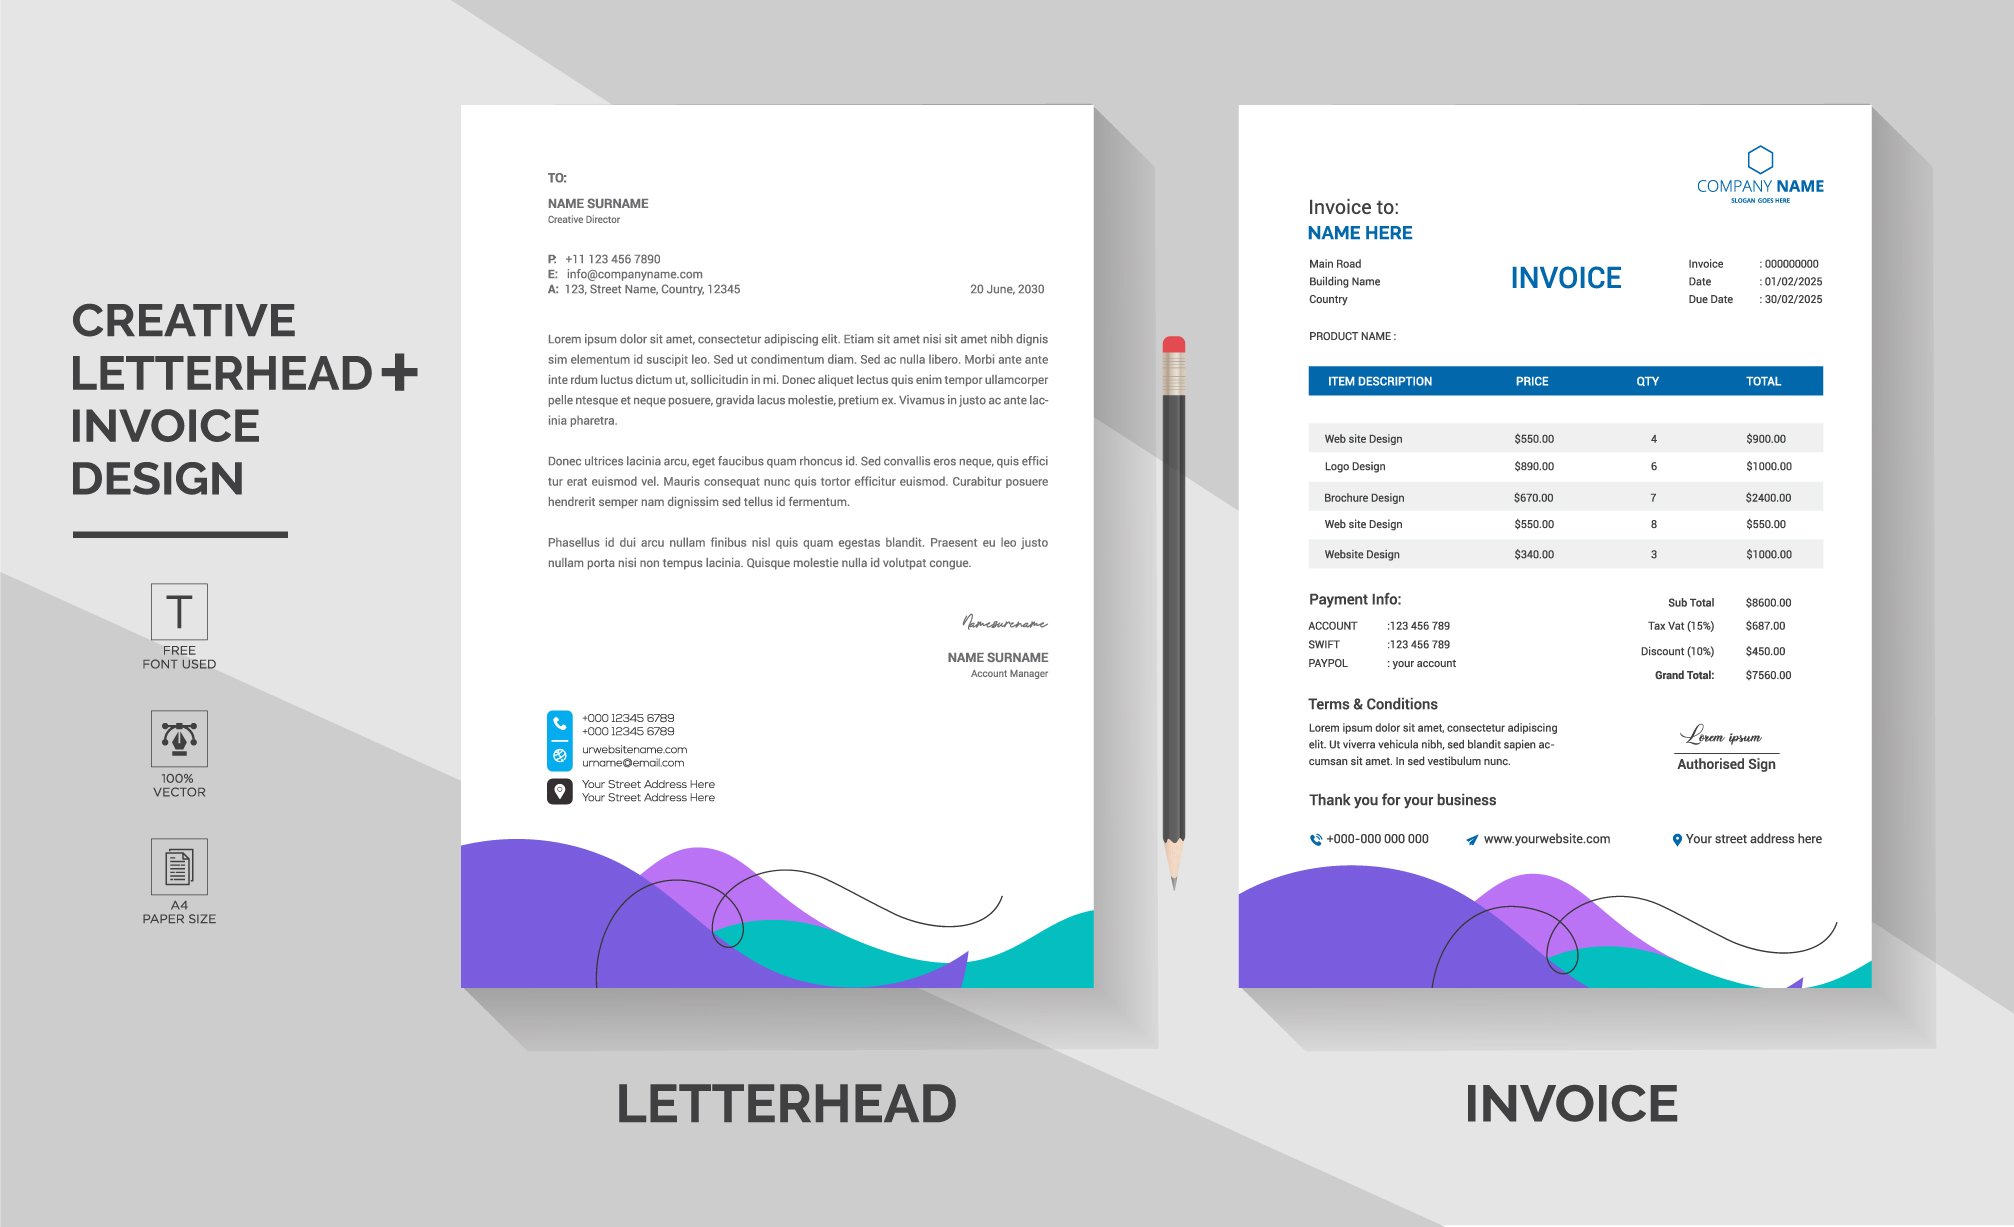 Invoice with Letterhead cover image.